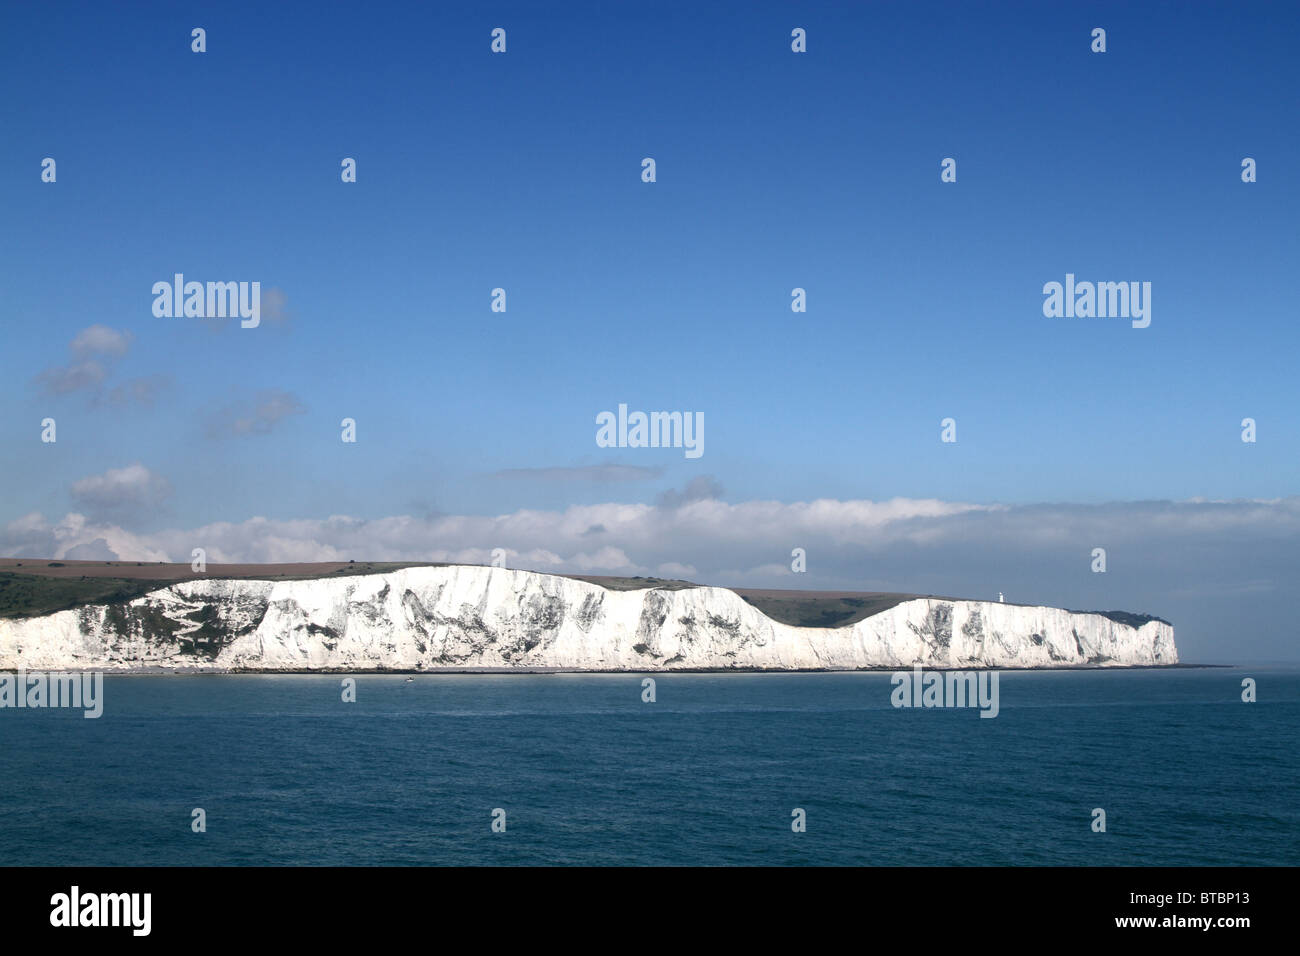 The White Cliffs of Dover seen from the English Channel. Stock Photo